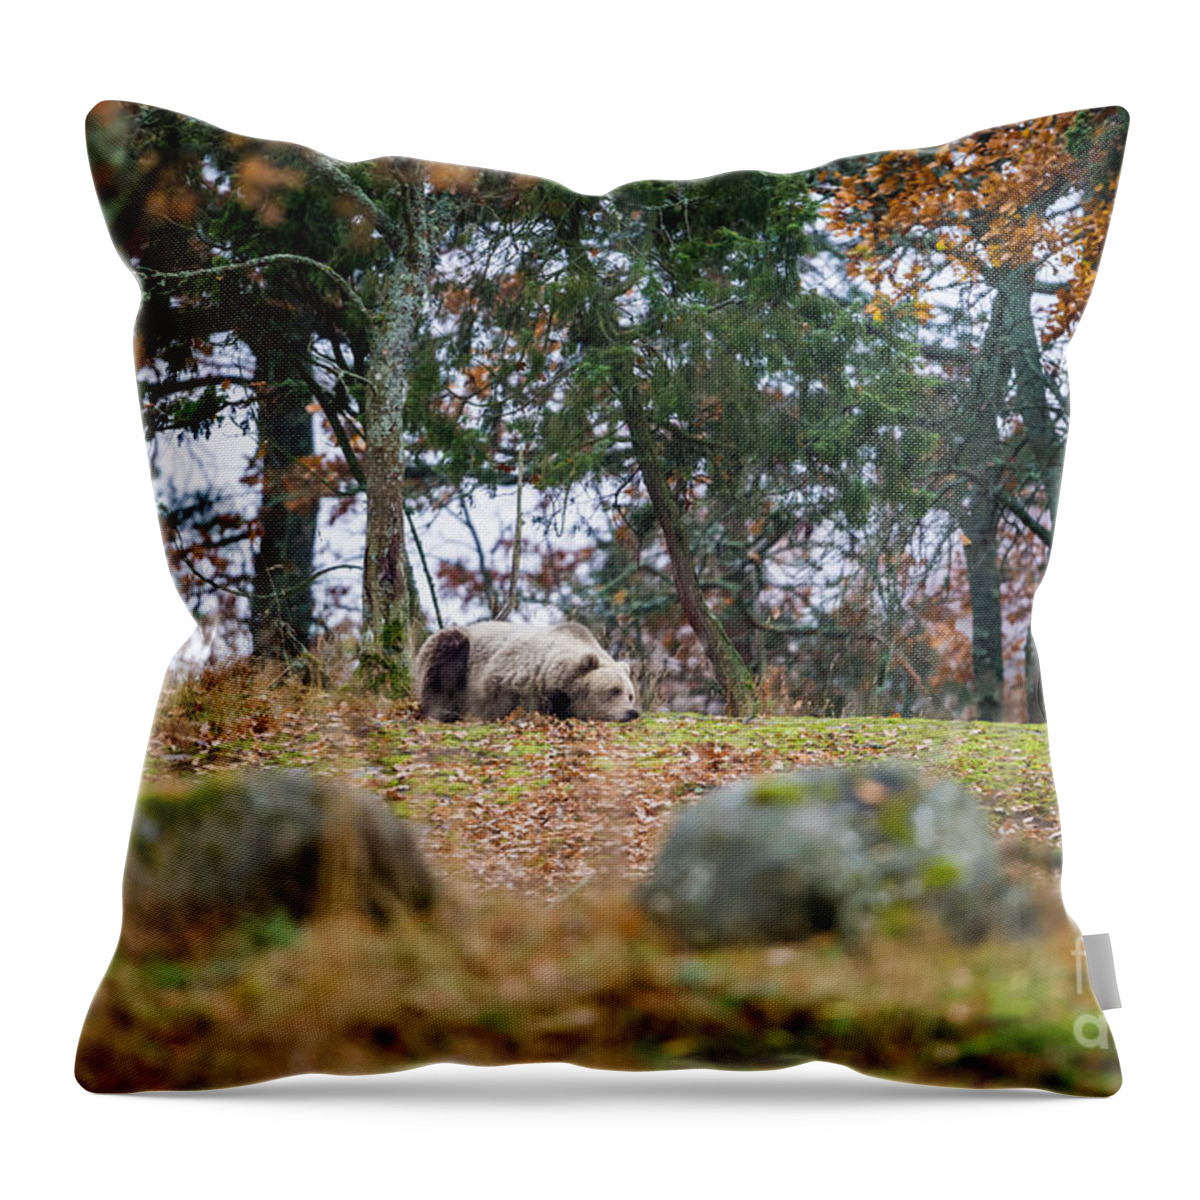 Wakening Bear Throw Pillow featuring the photograph Wakening Bear by Torbjorn Swenelius